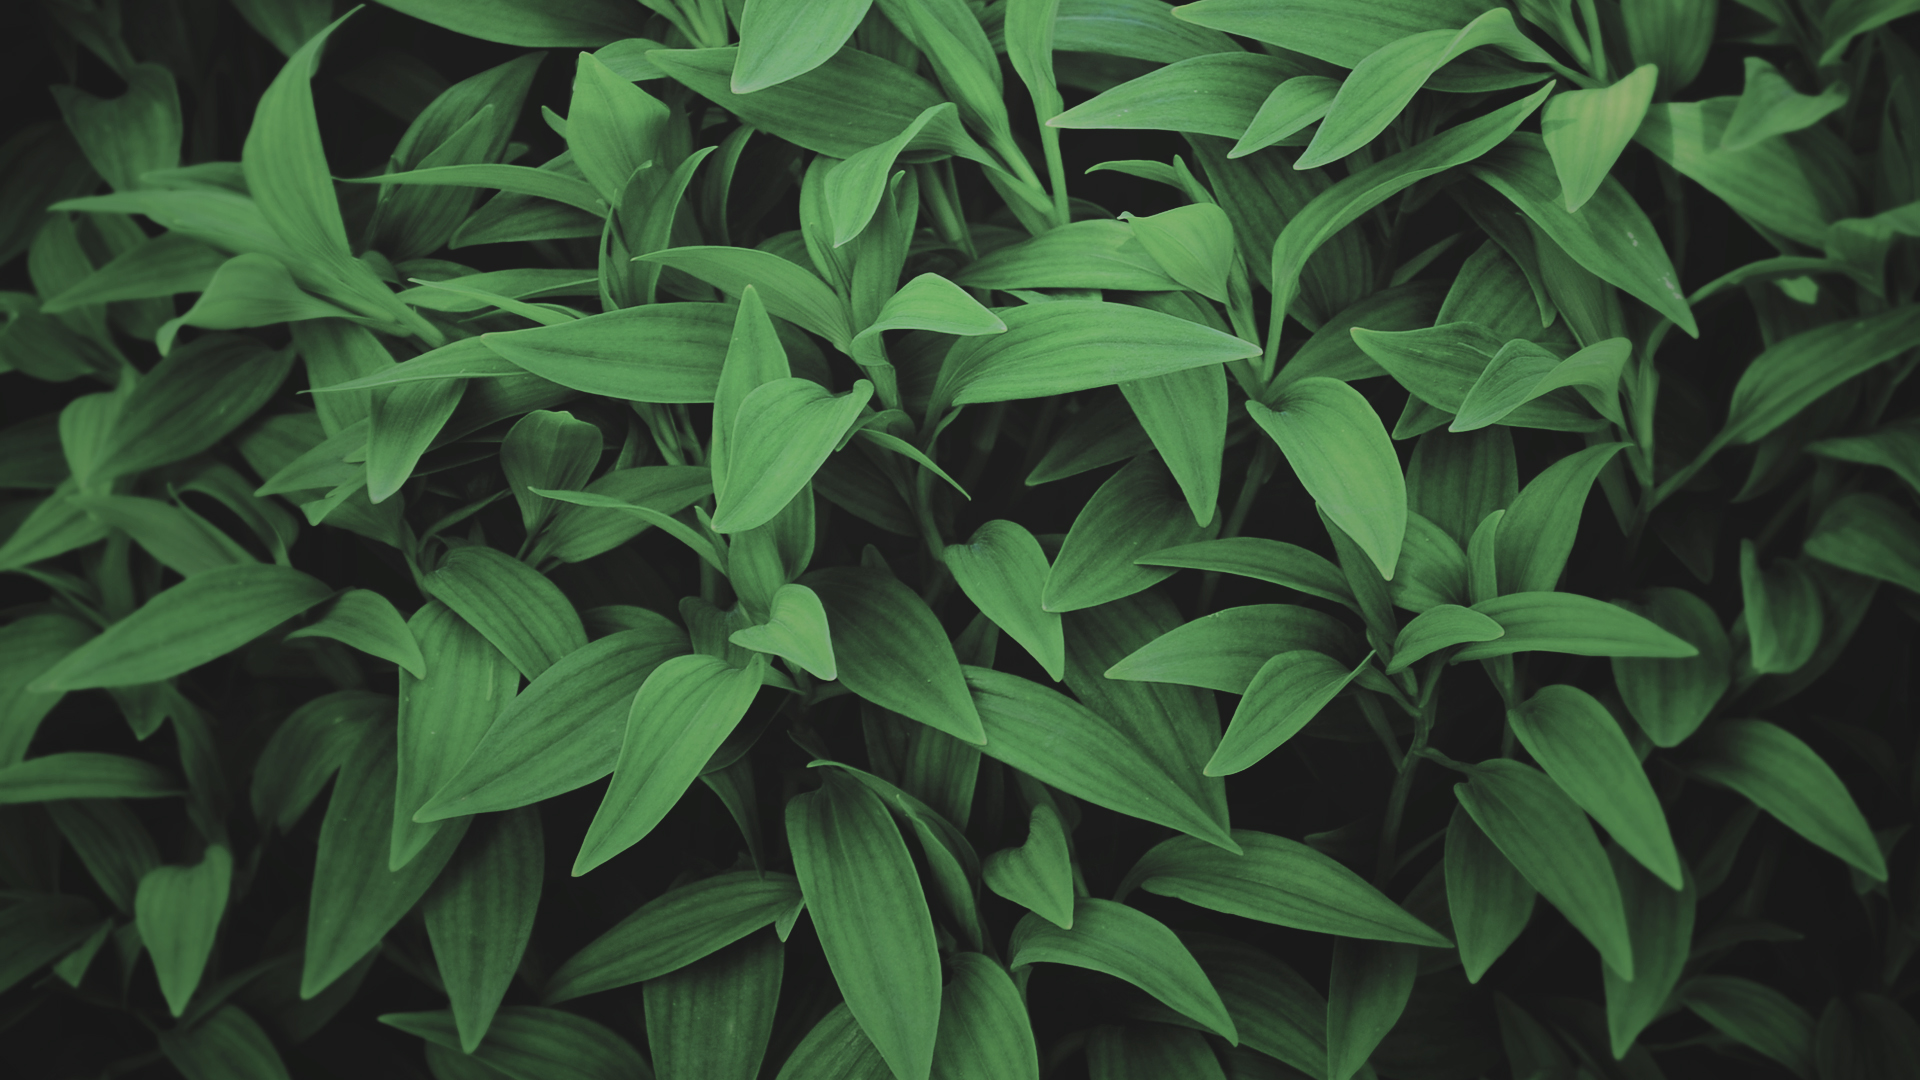 General 1920x1080 plants leaves green nature